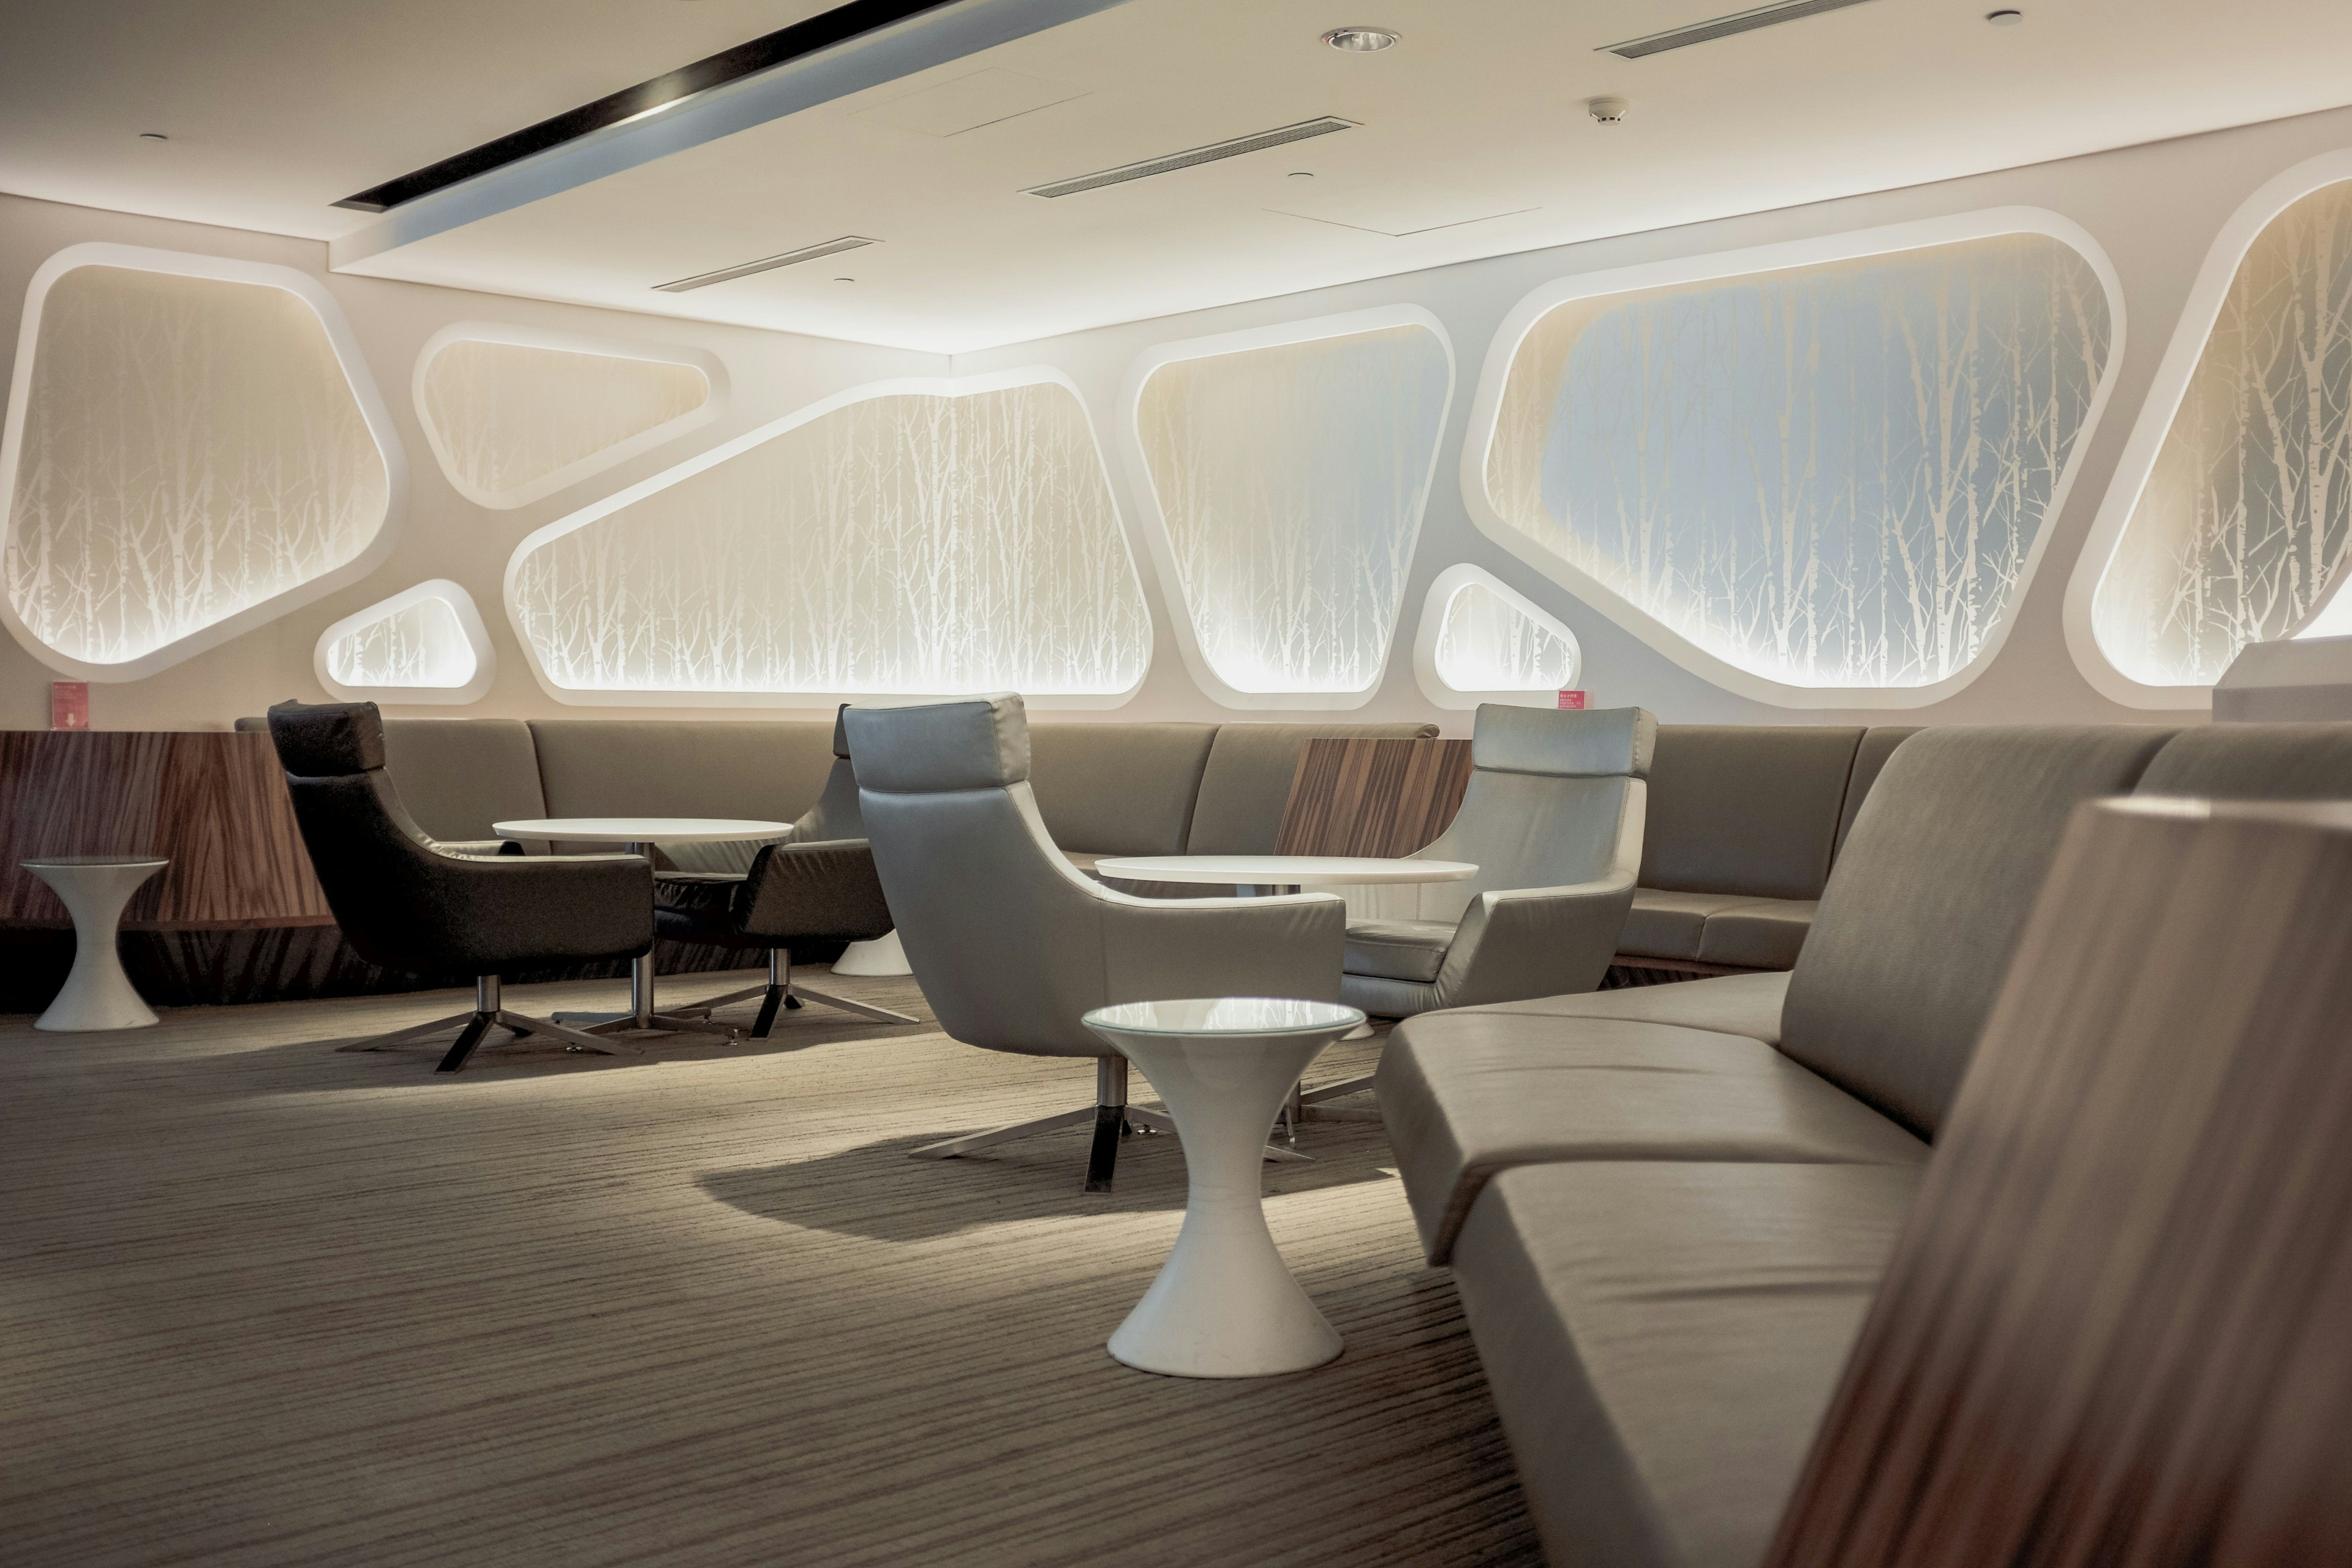 A photograph of a somewhat futuristic-looking airport lounge